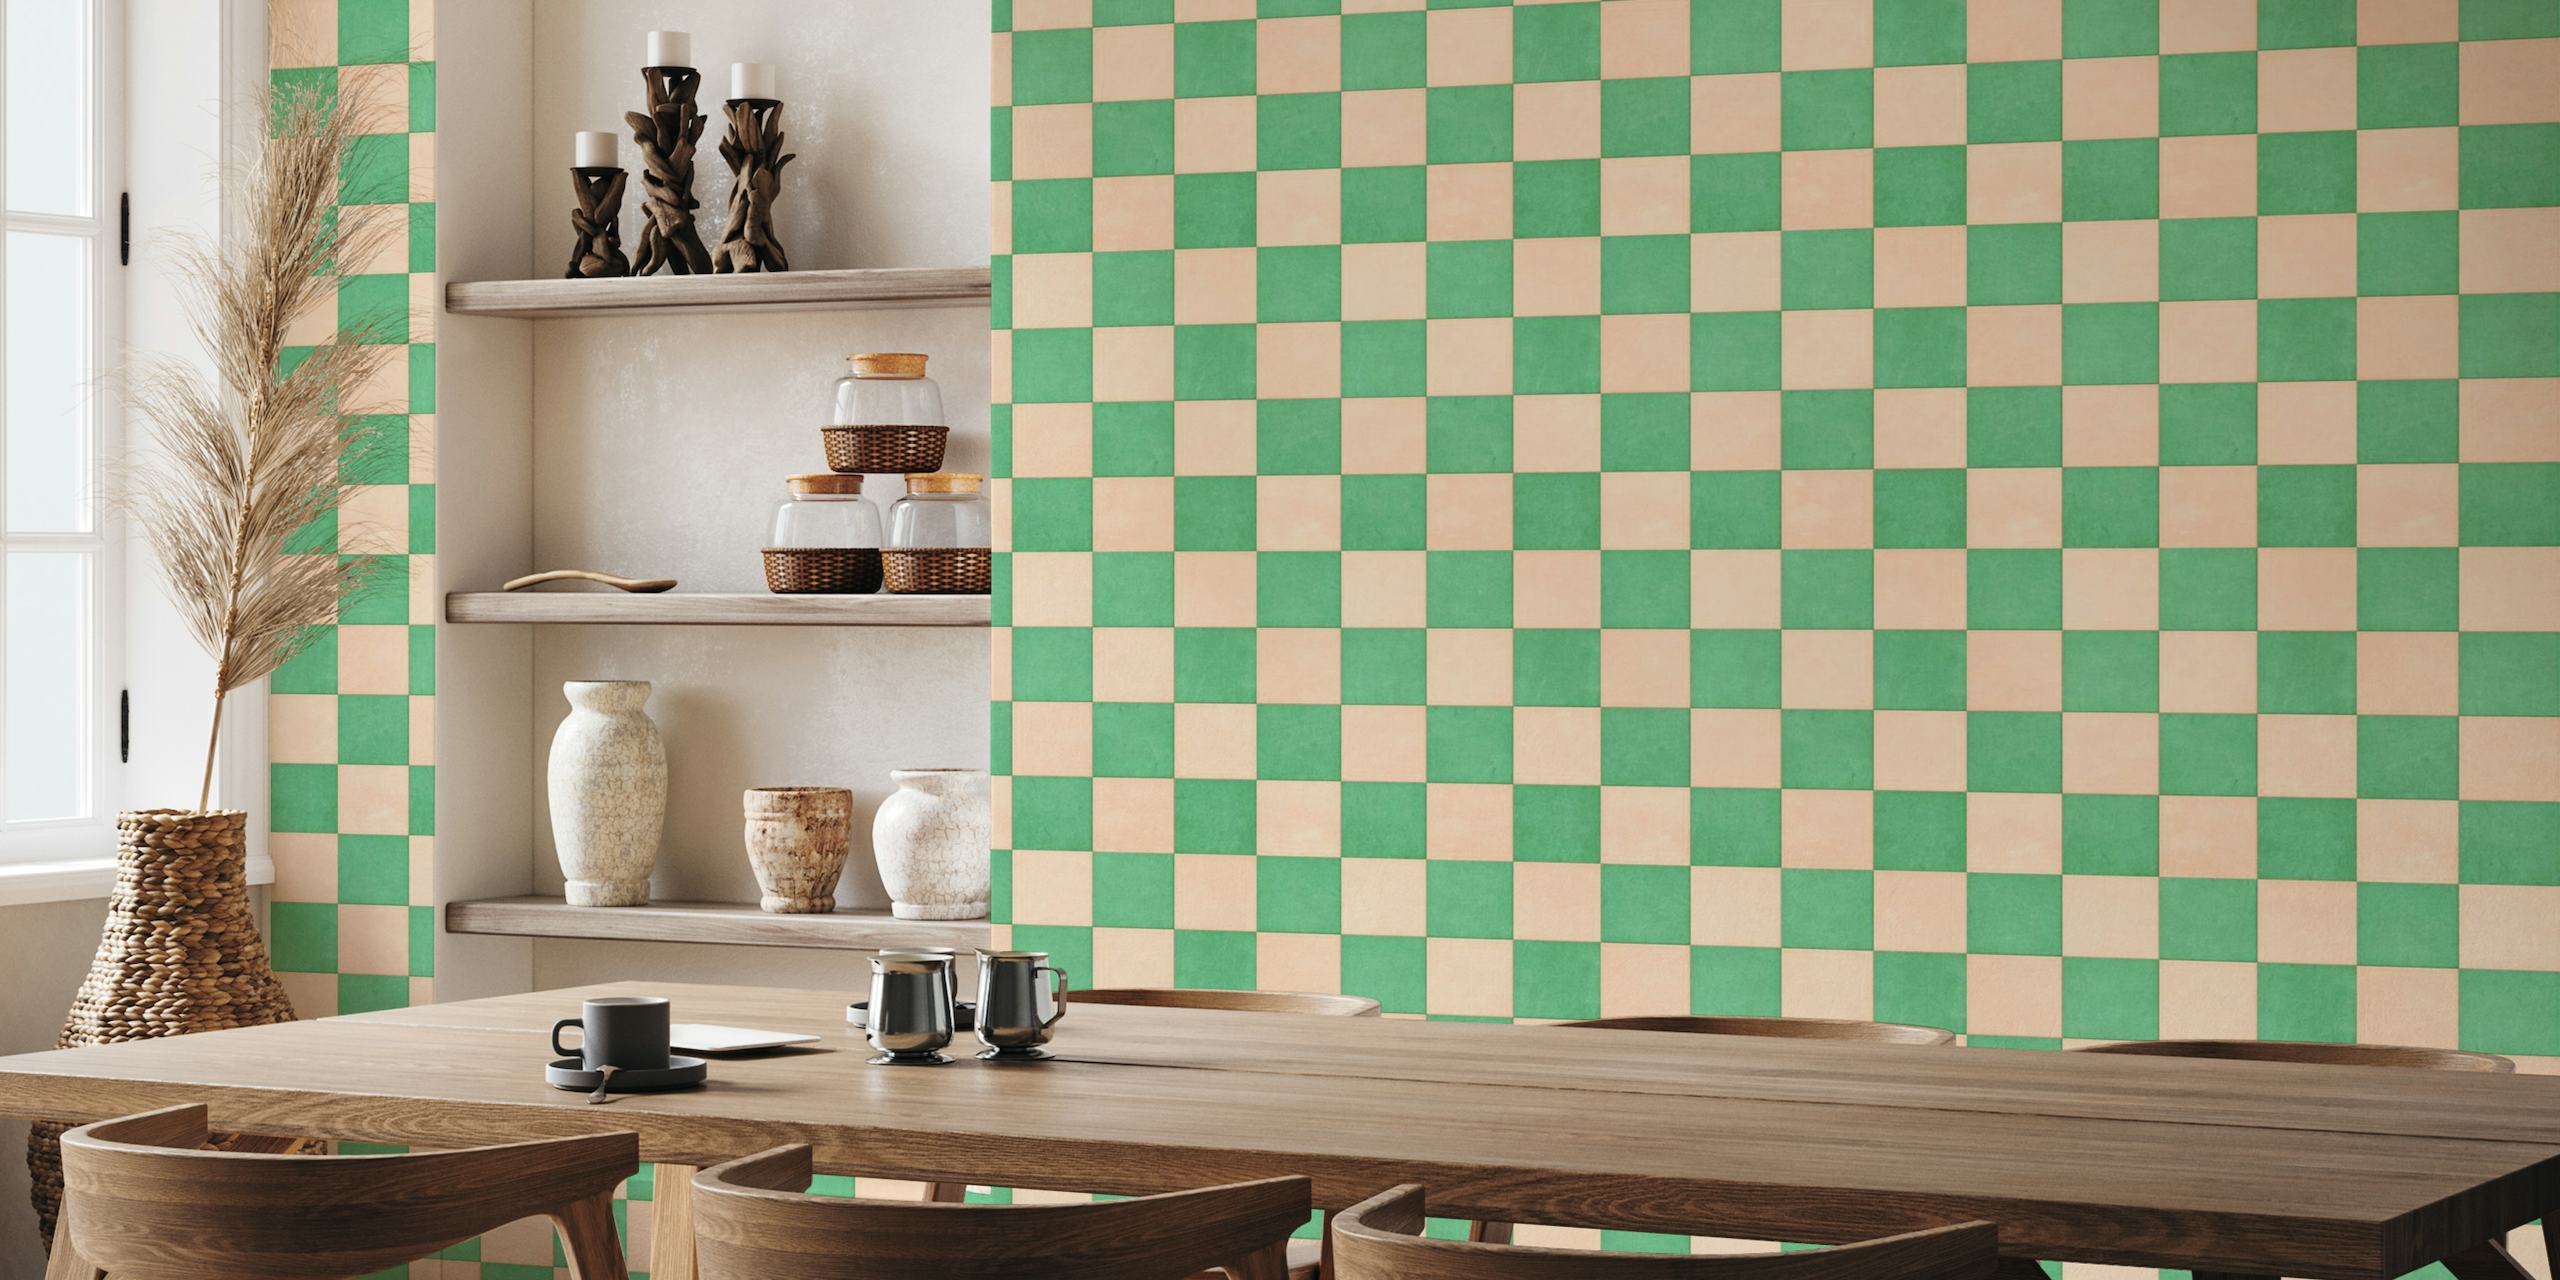 TILES 002 A - Checkerboard pattern wall mural in soft green and blush pink